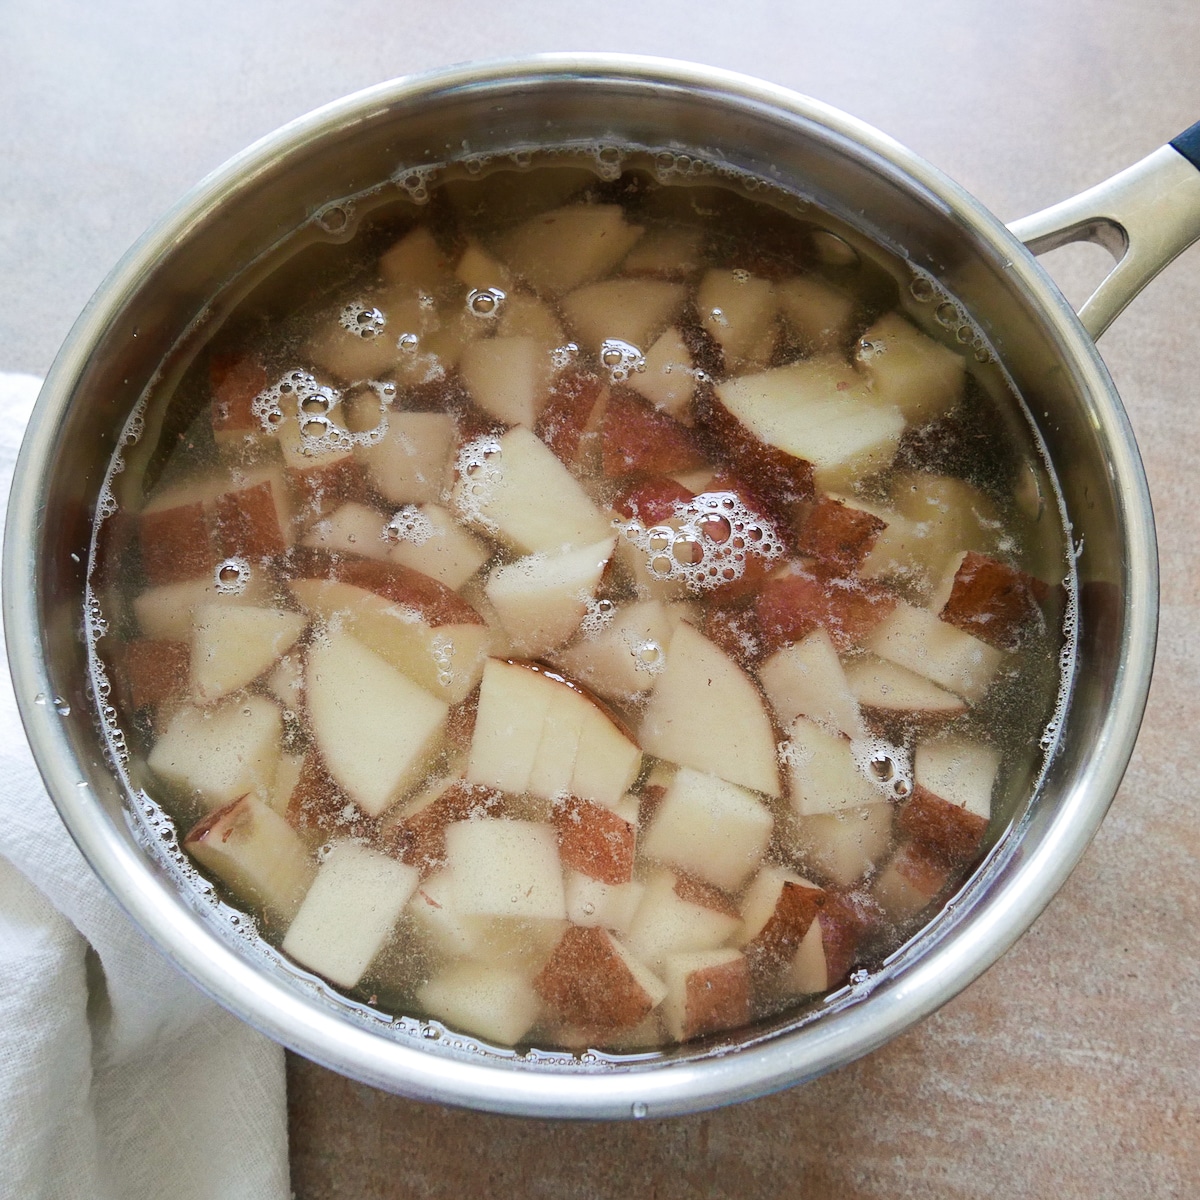 Cut potatoes in a large saucepan covered with water.